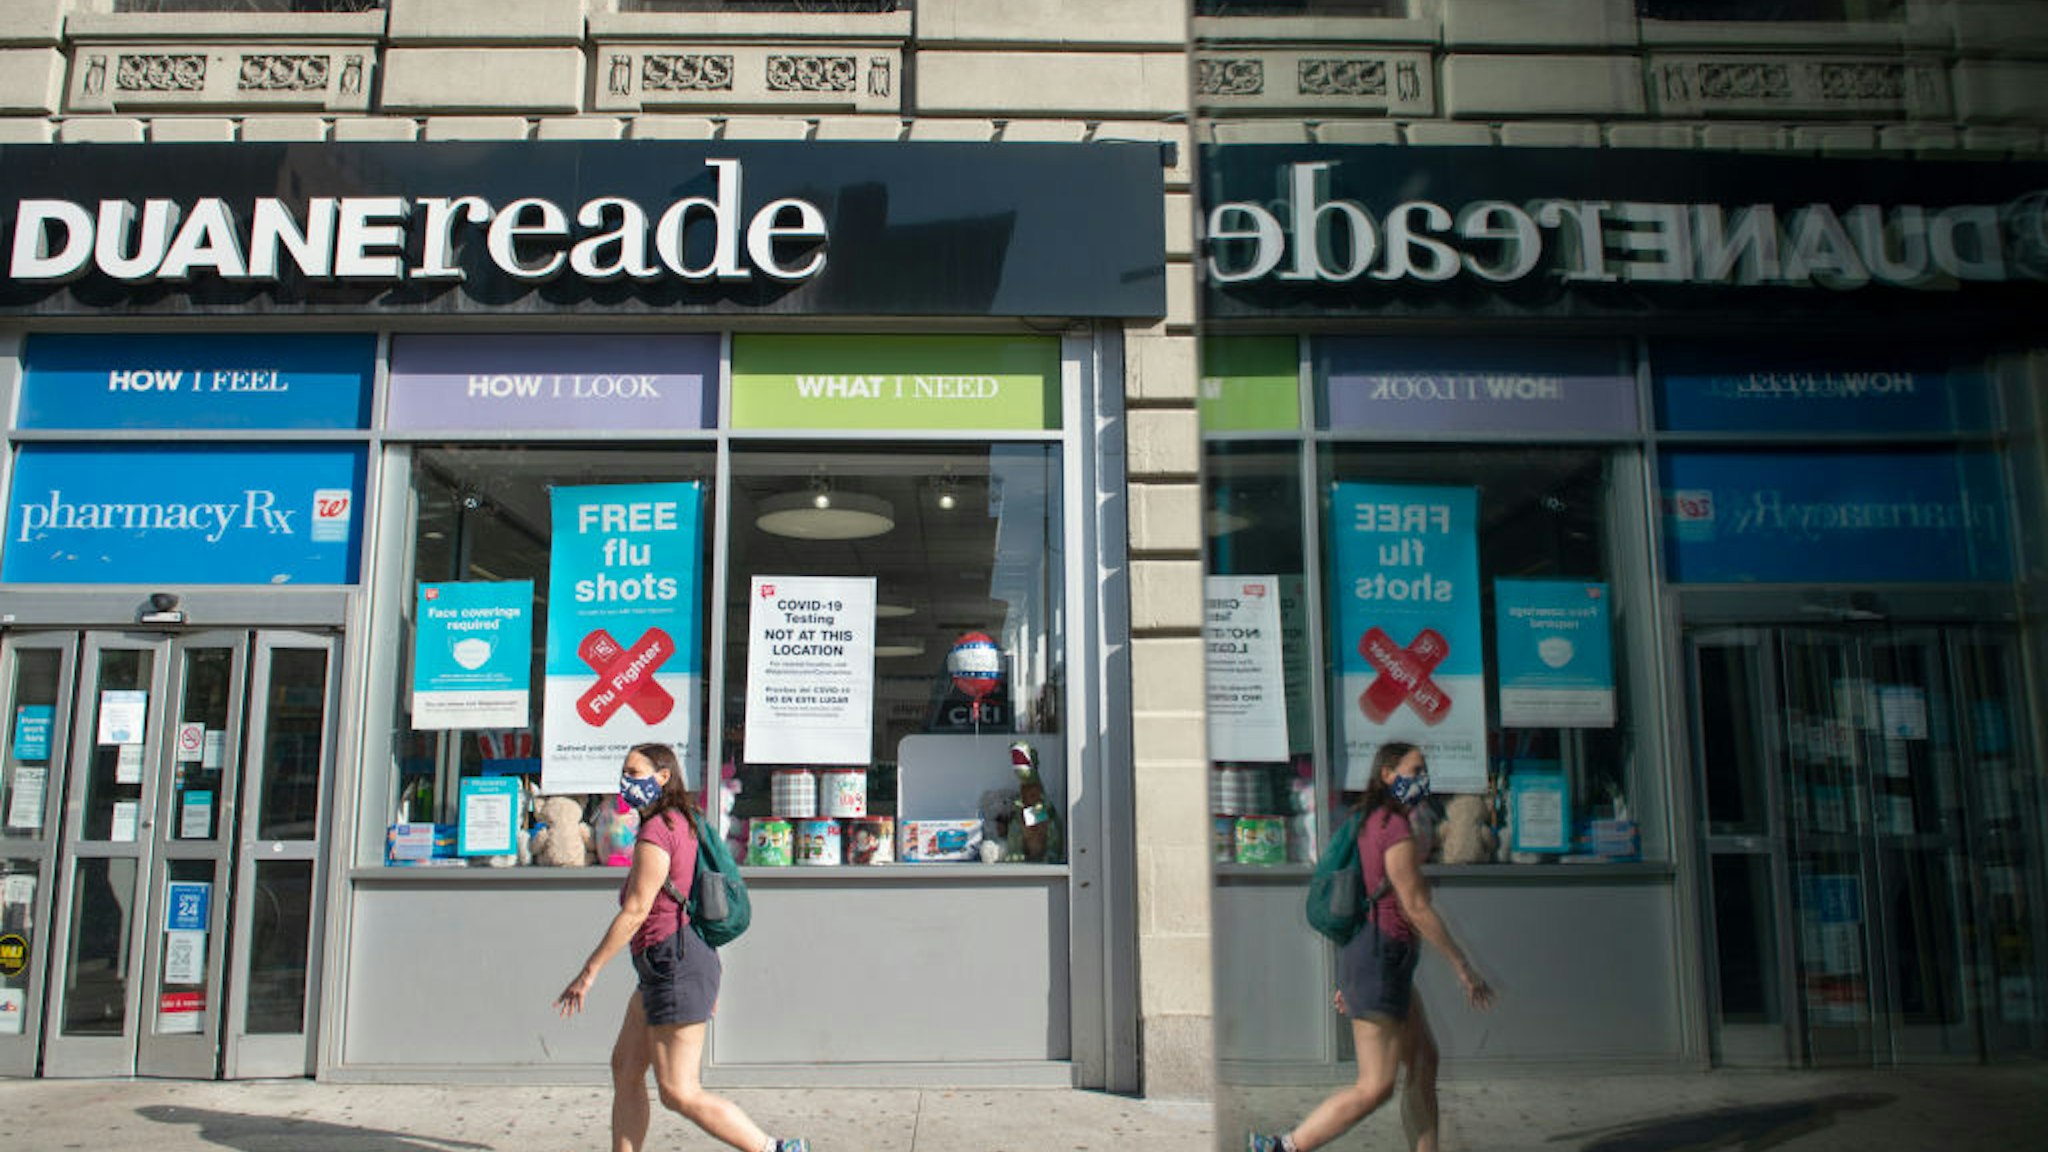 NEW YORK, NEW YORK - SEPTEMBER 28: A woman wearing a mask walks past a Duane Reade pharmacy near a LinkNYC screen creating a reflection as the city continues Phase 4 of re-opening following restrictions imposed to slow the spread of coronavirus on September 28, 2020 in New York City. The fourth phase allows outdoor arts and entertainment, sporting events without fans and media production. (Photo by Alexi Rosenfeld/Getty Images)